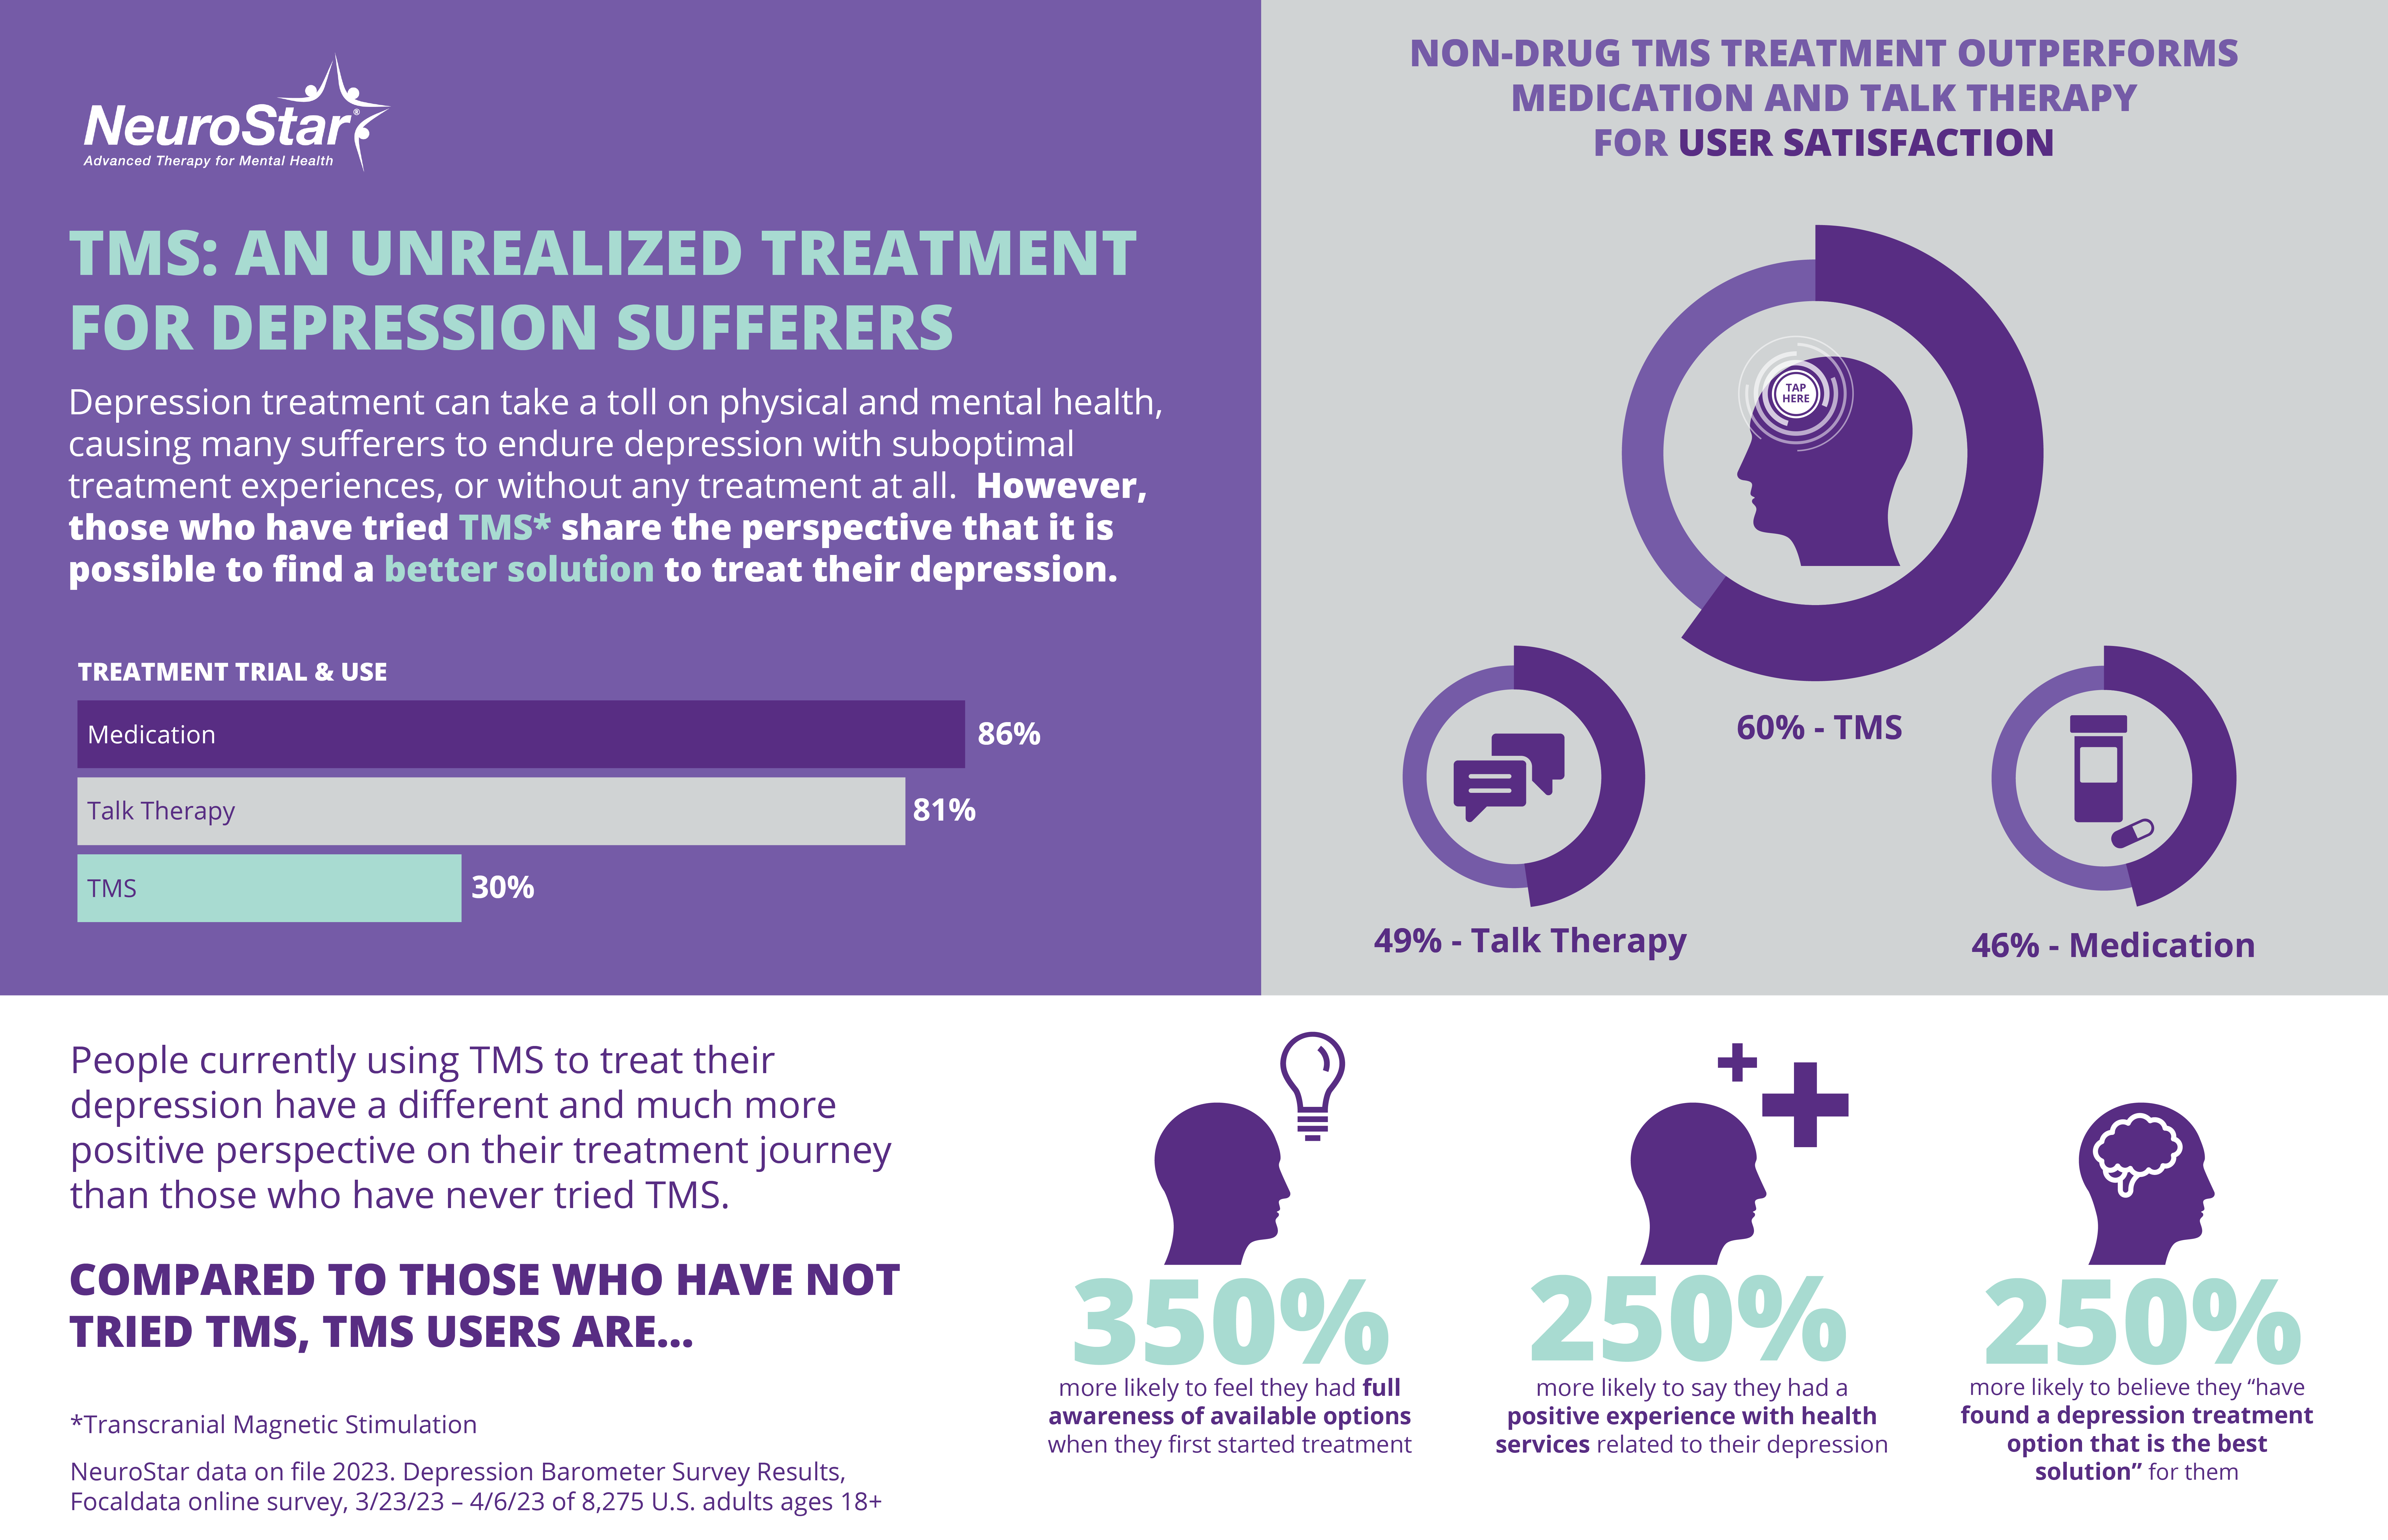 FocalData survey results released by NeuroStar detail the depression treatment experience among U.S. depression sufferers.